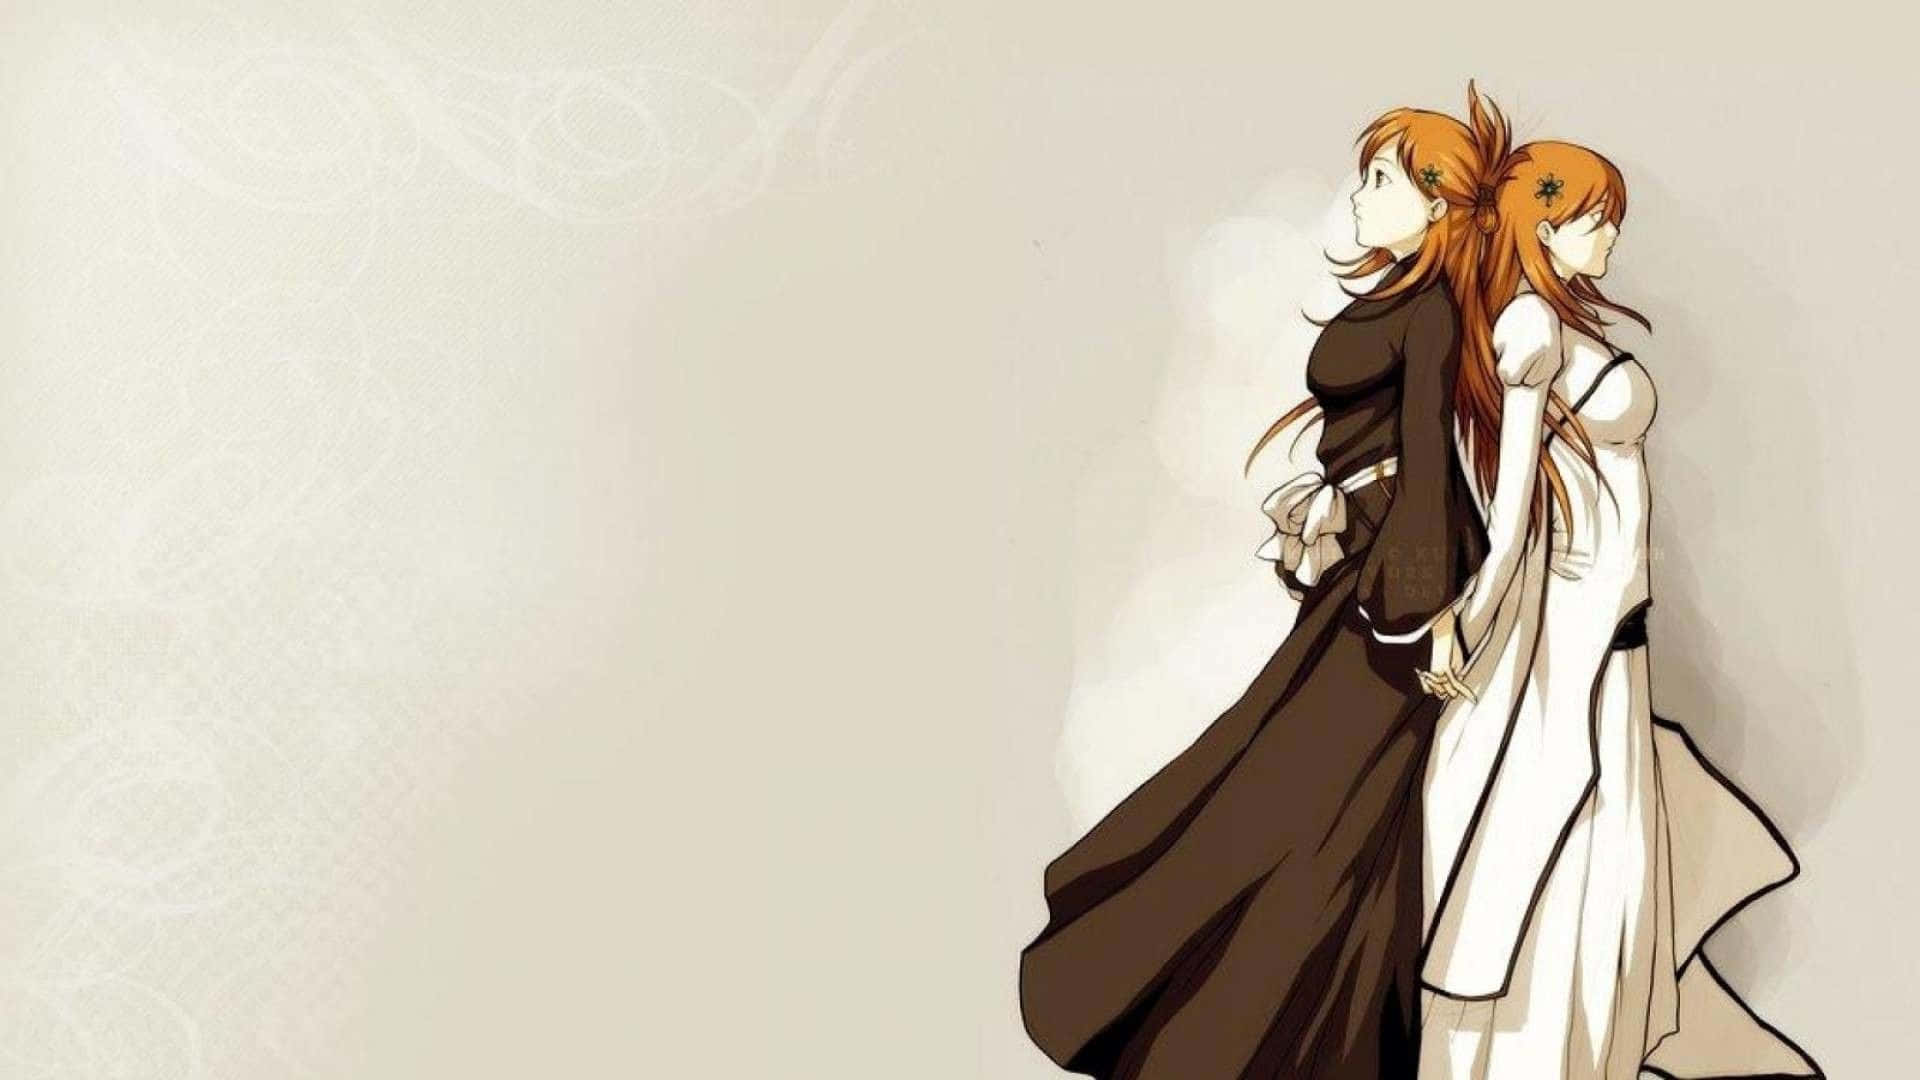 Orihime Inoue, a beautiful and brave soul. Wallpaper